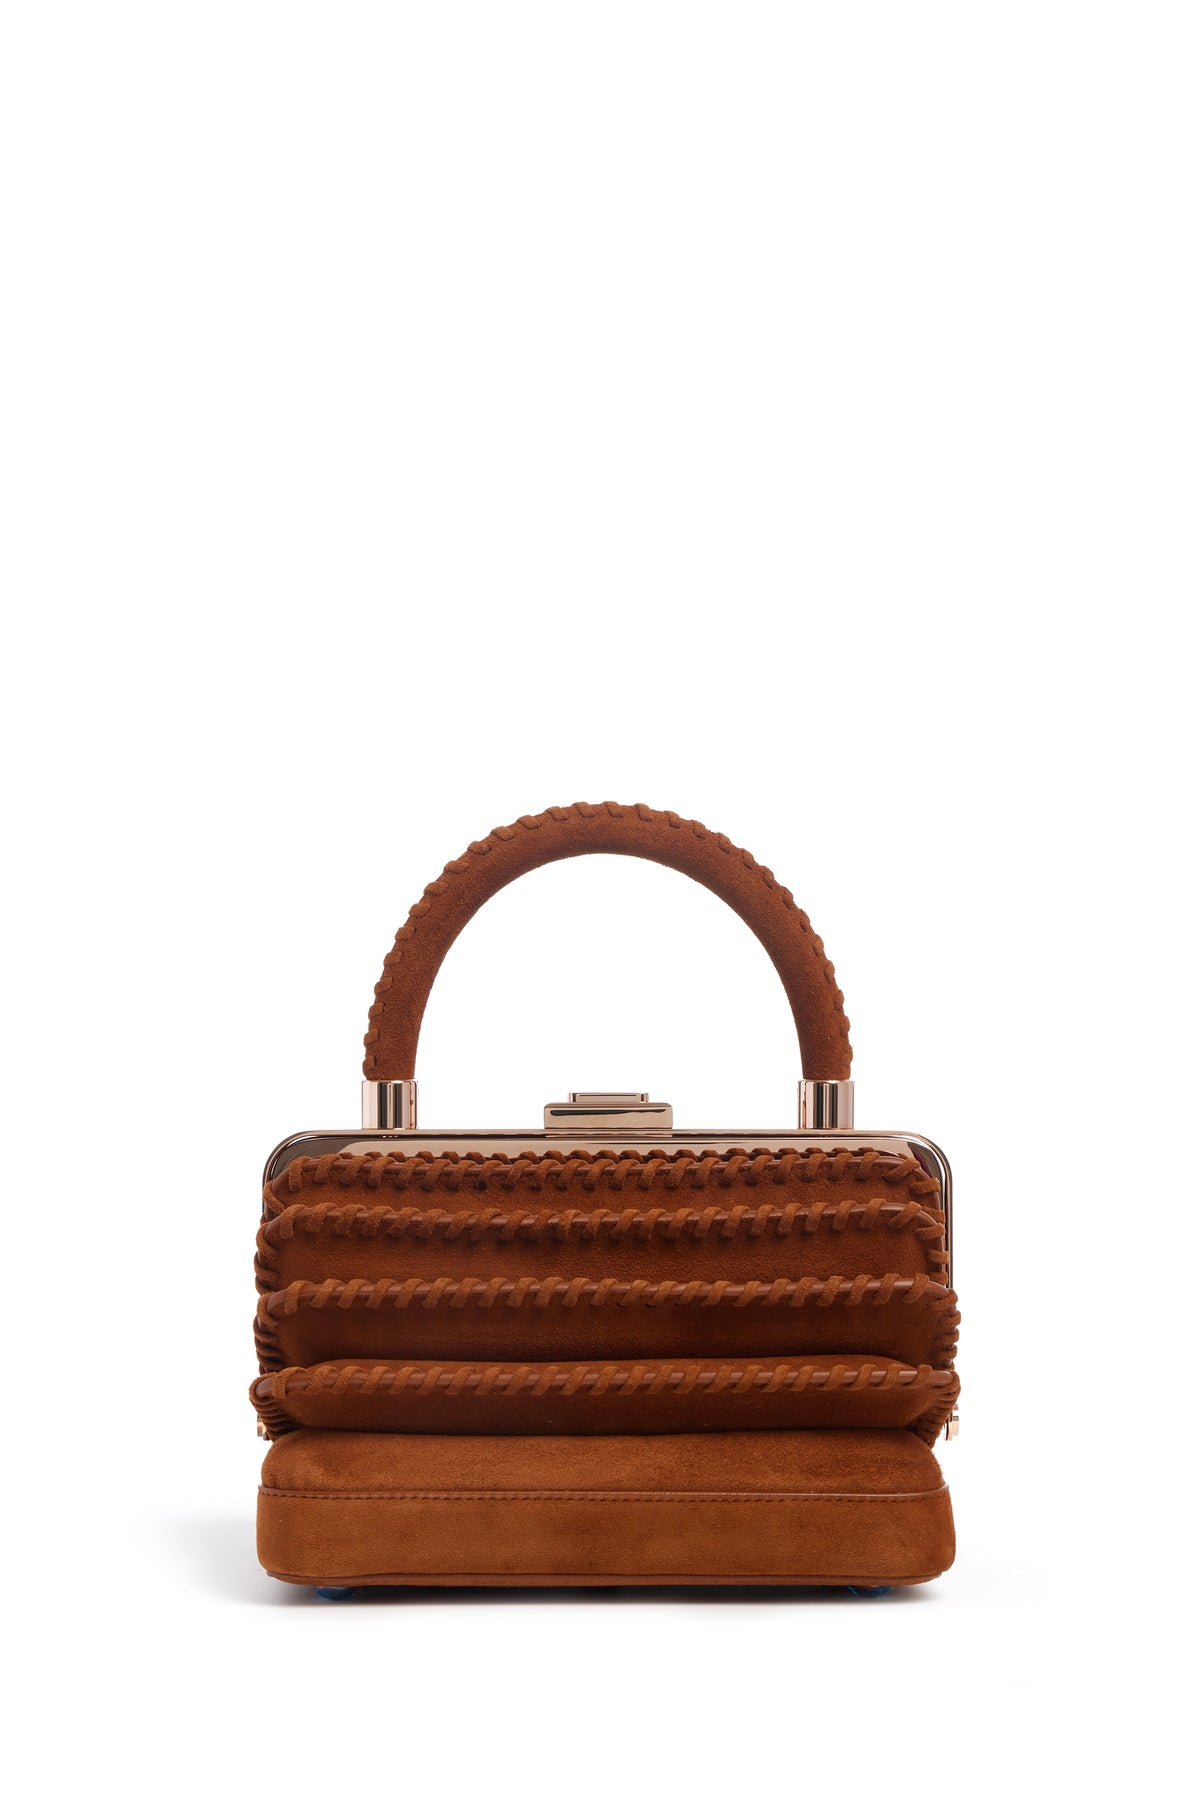 Whipstitch Diana Bag in Cognac Suede